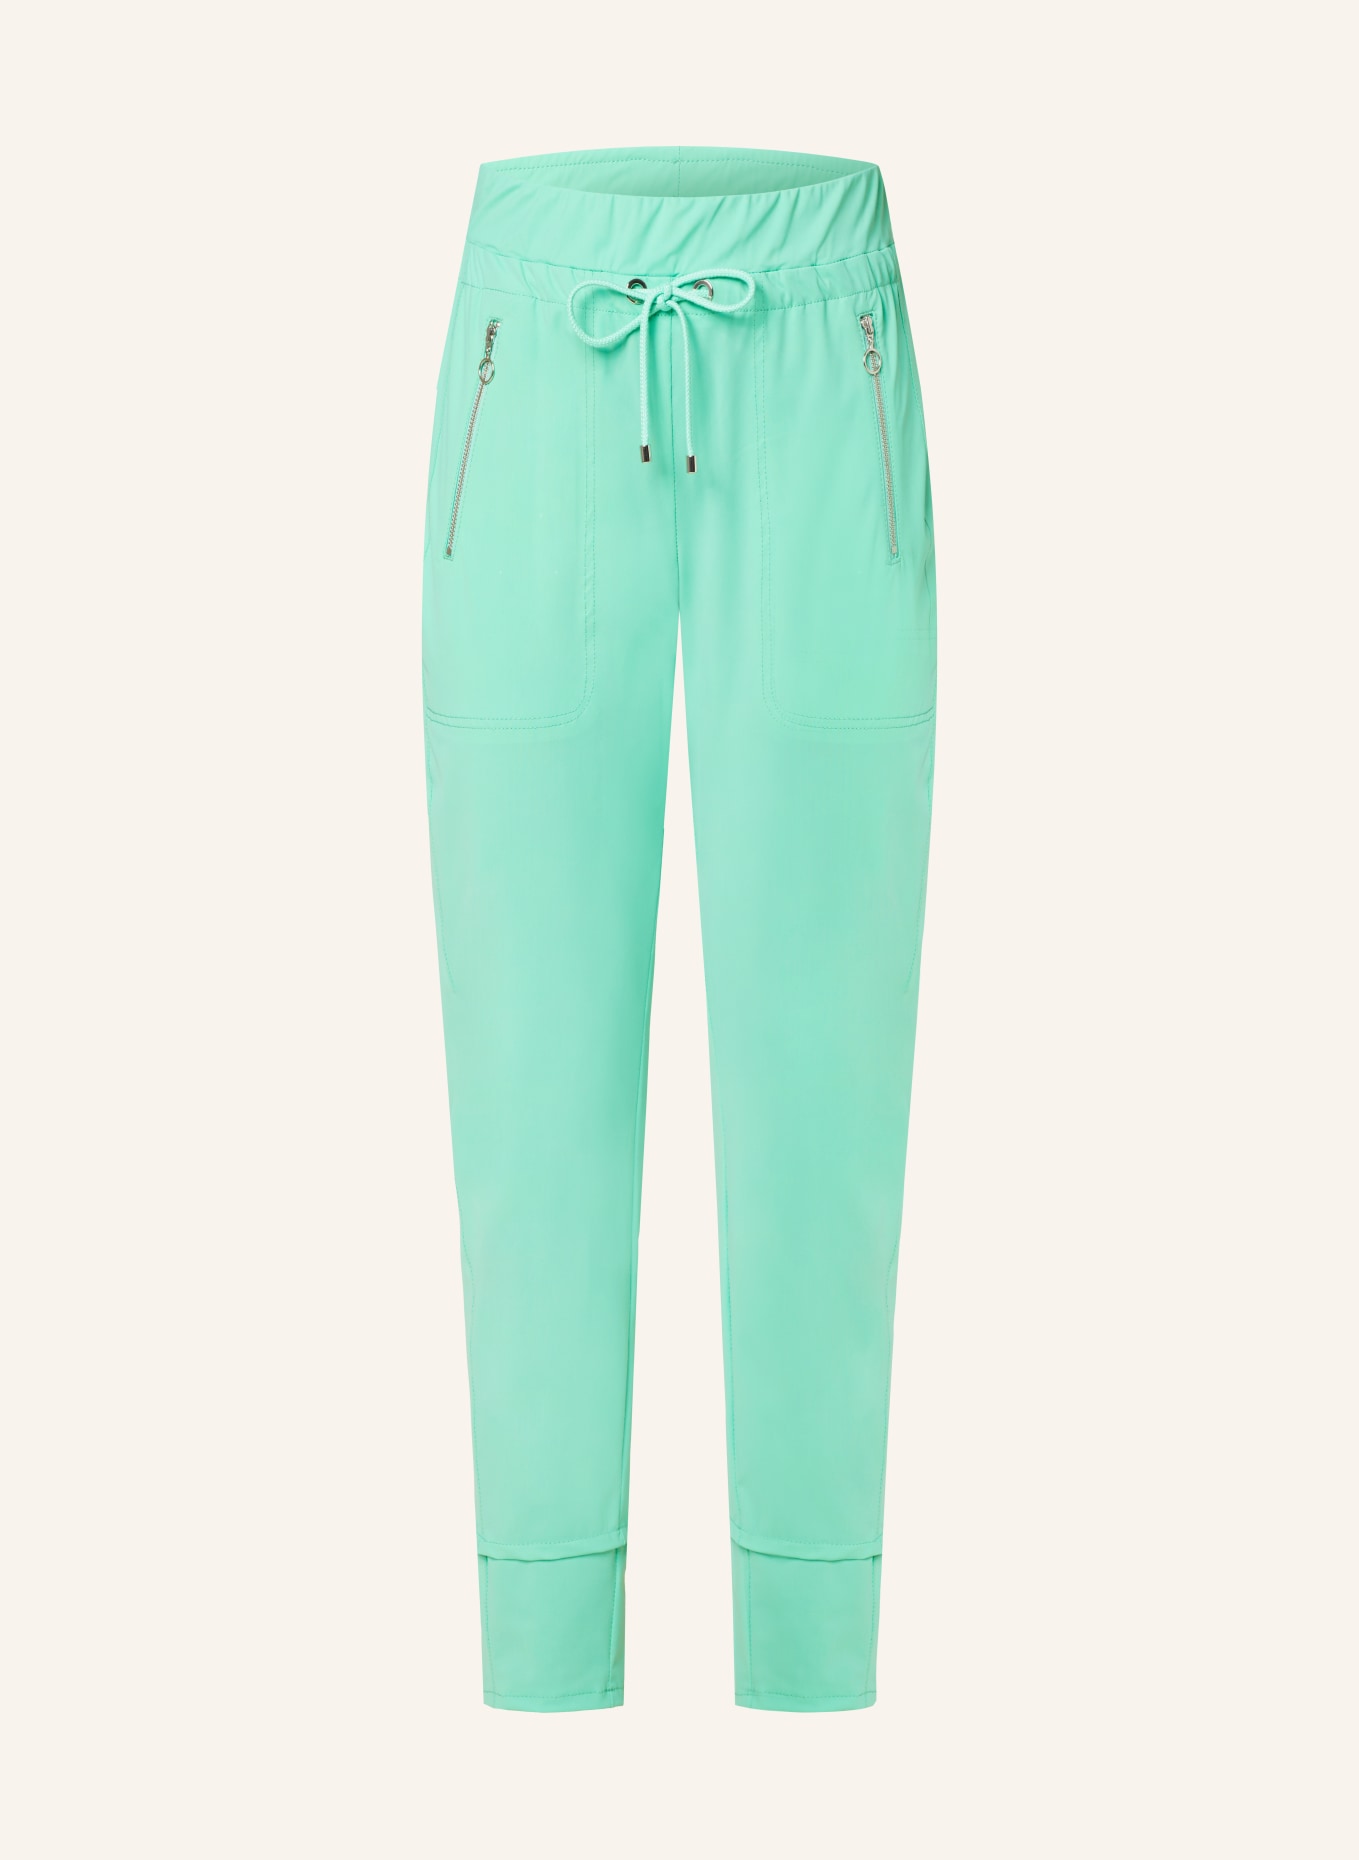 MAC Trousers EASY ACTIVE in jogger style, Color: MINT (Image 1)